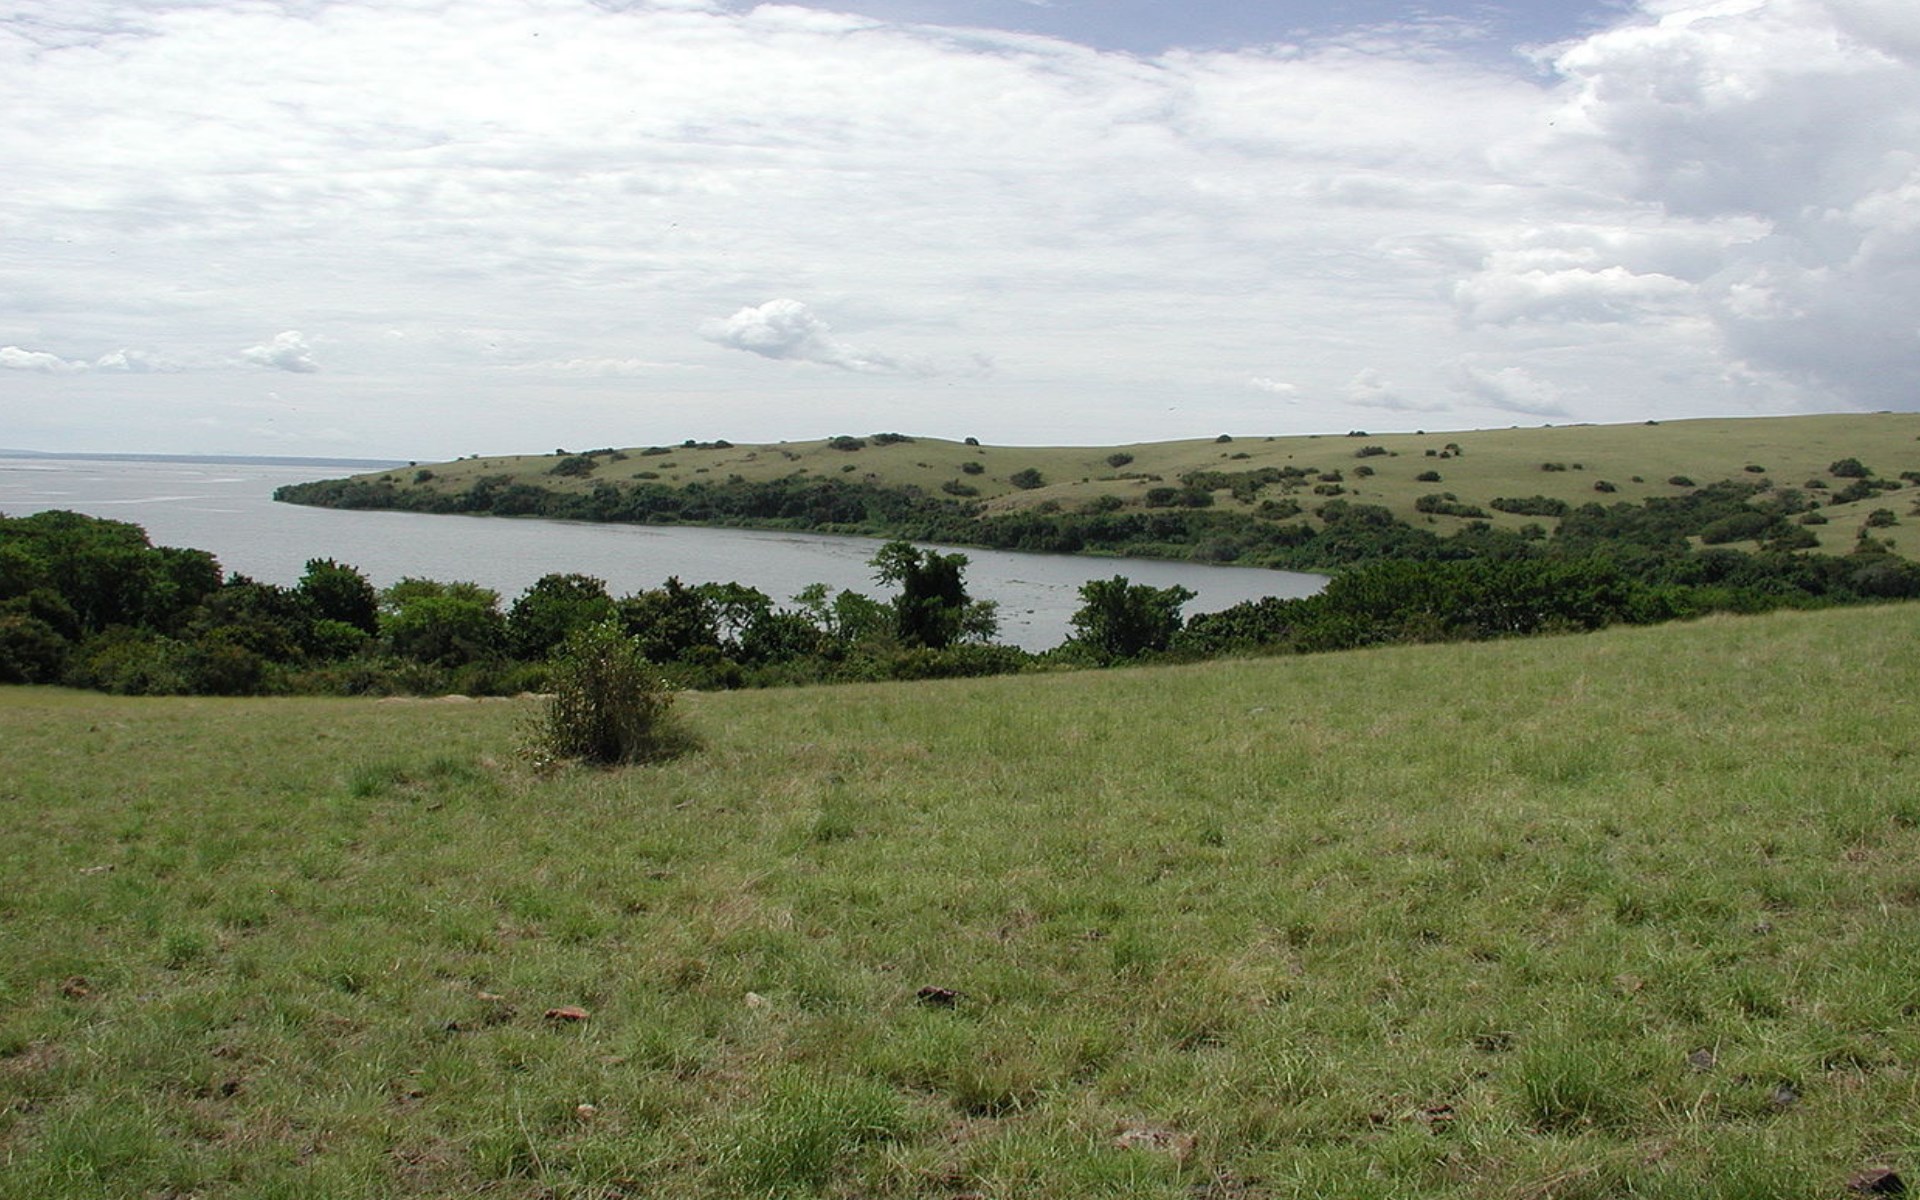 Ndere Island National Park